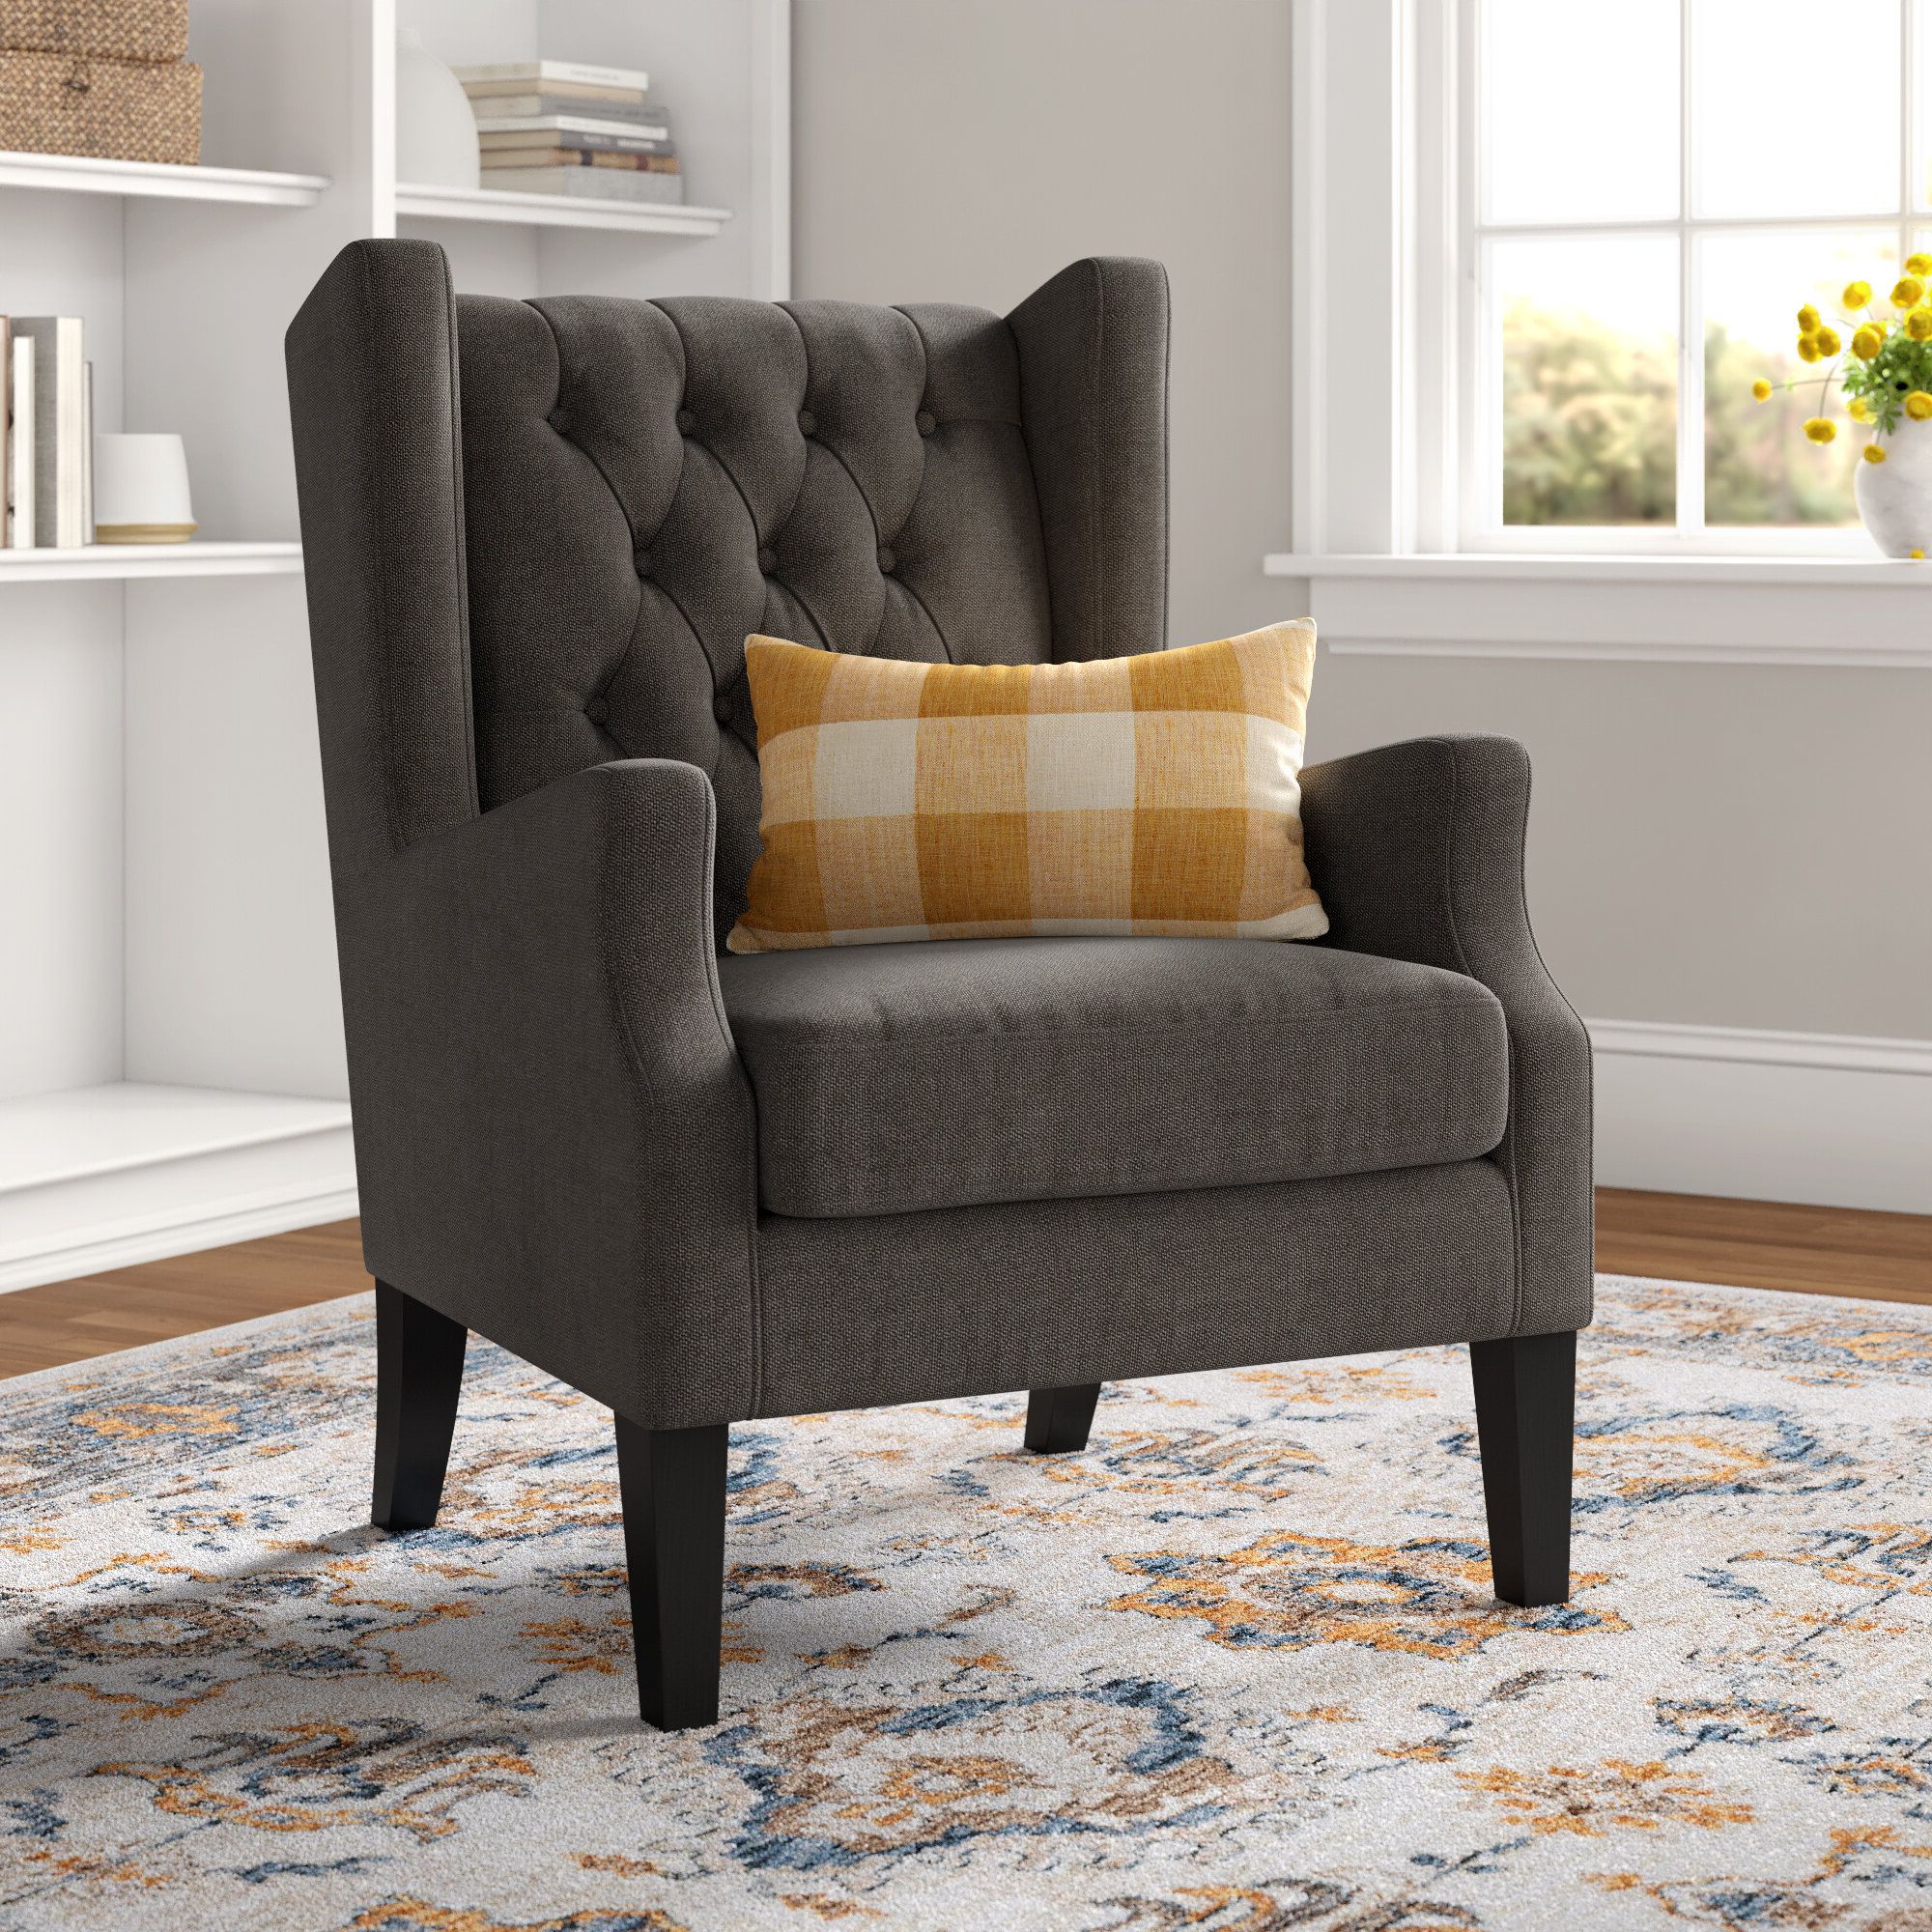 Popular Allis Tufted Polyester Blend Wingback Chairs For Allis Wingback Chair (View 14 of 20)